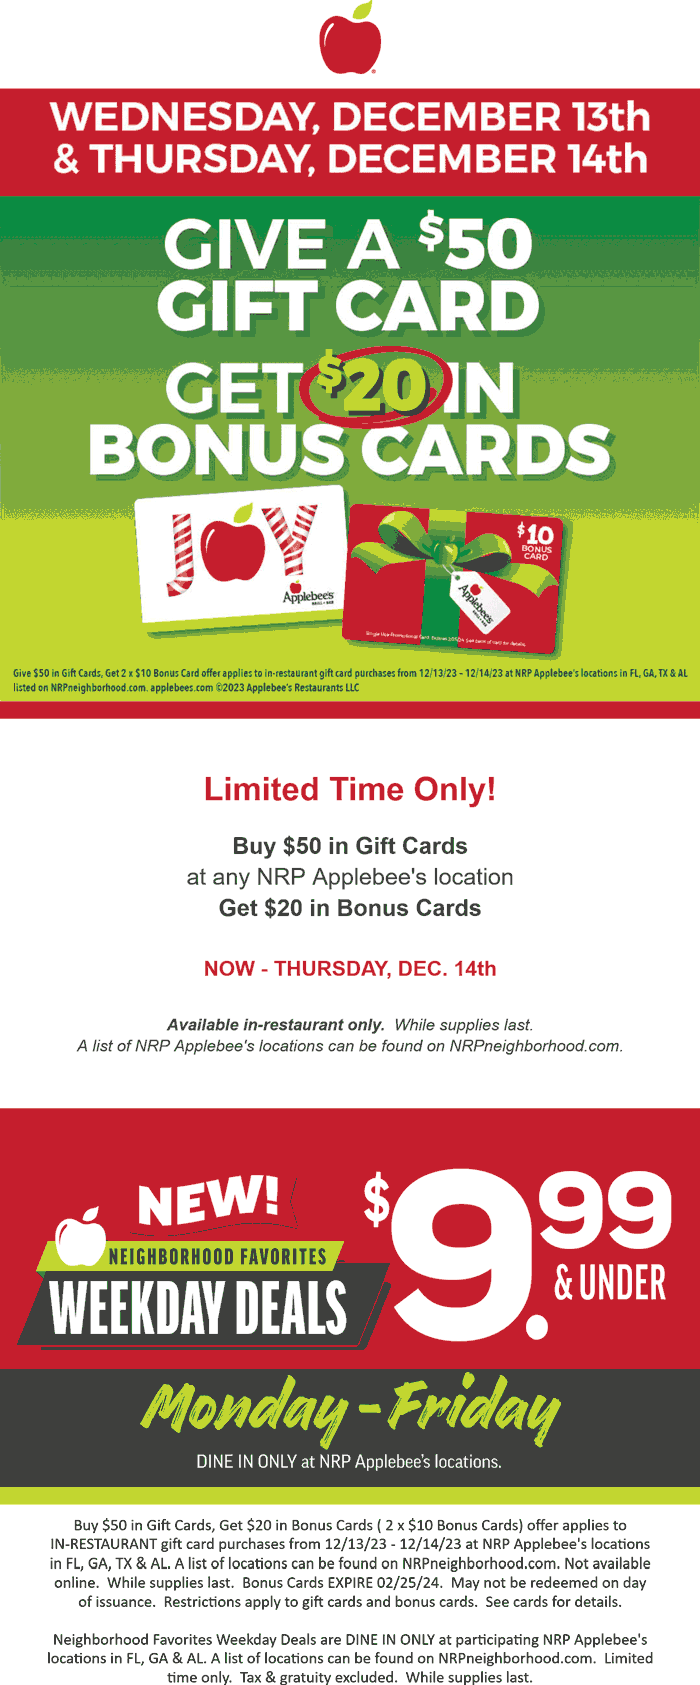 $20 gift card free with your $50 in cards at Applebees restaurants #applebees